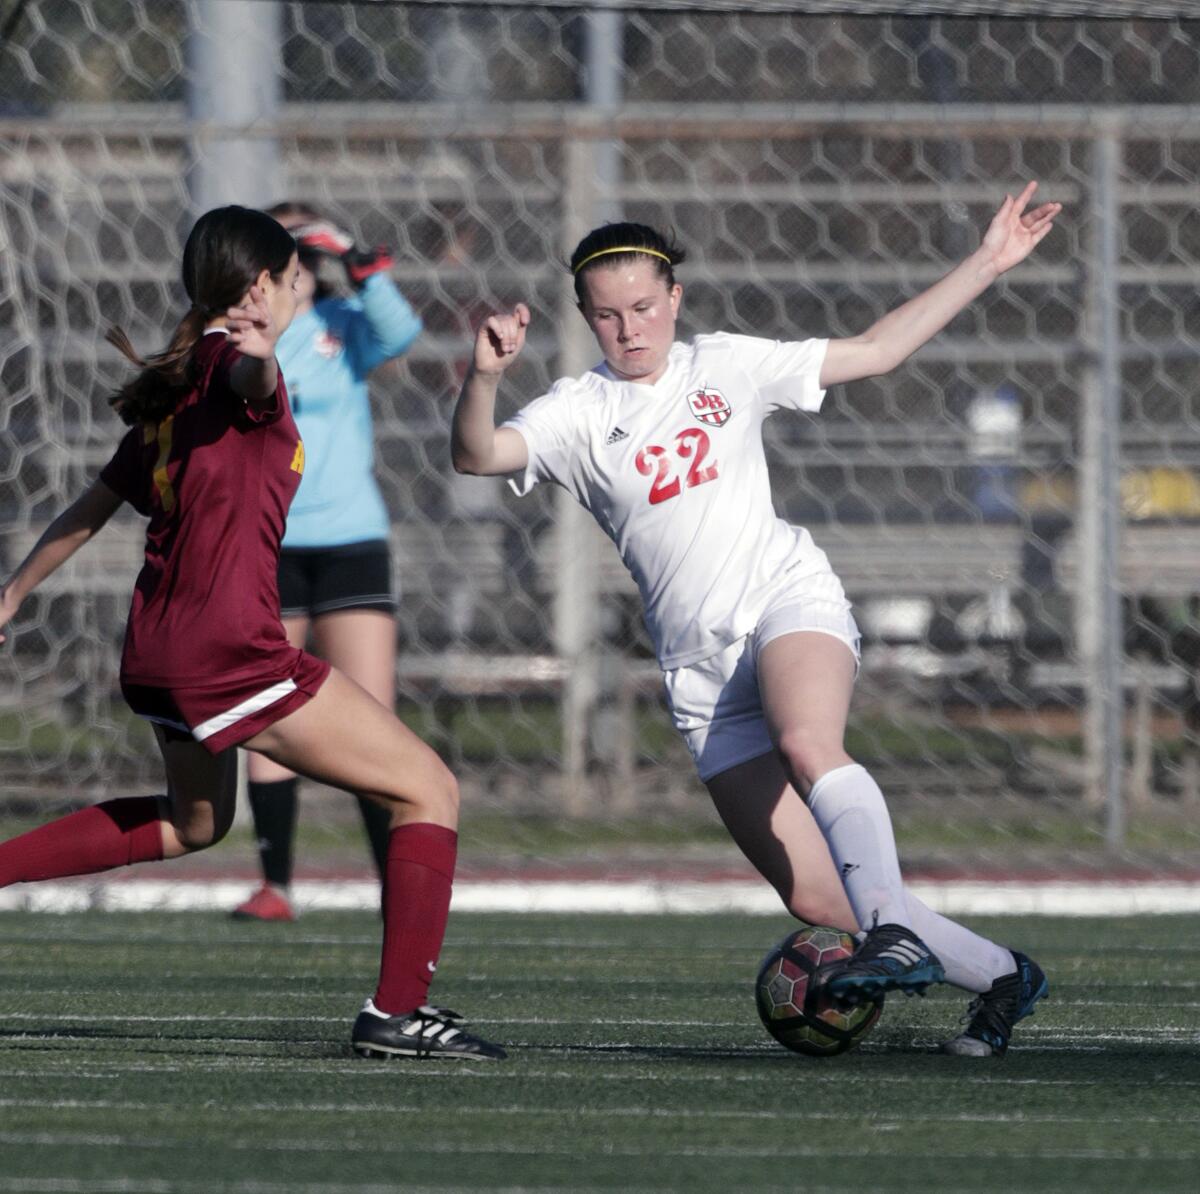 Burroughs' Maille Romberger cuts the other direction against Arcadia's Bertha Guzman in a Pacific League girls' soccer game at Arcadia High School in Arcadia on Tuesday, January 28, 2020.